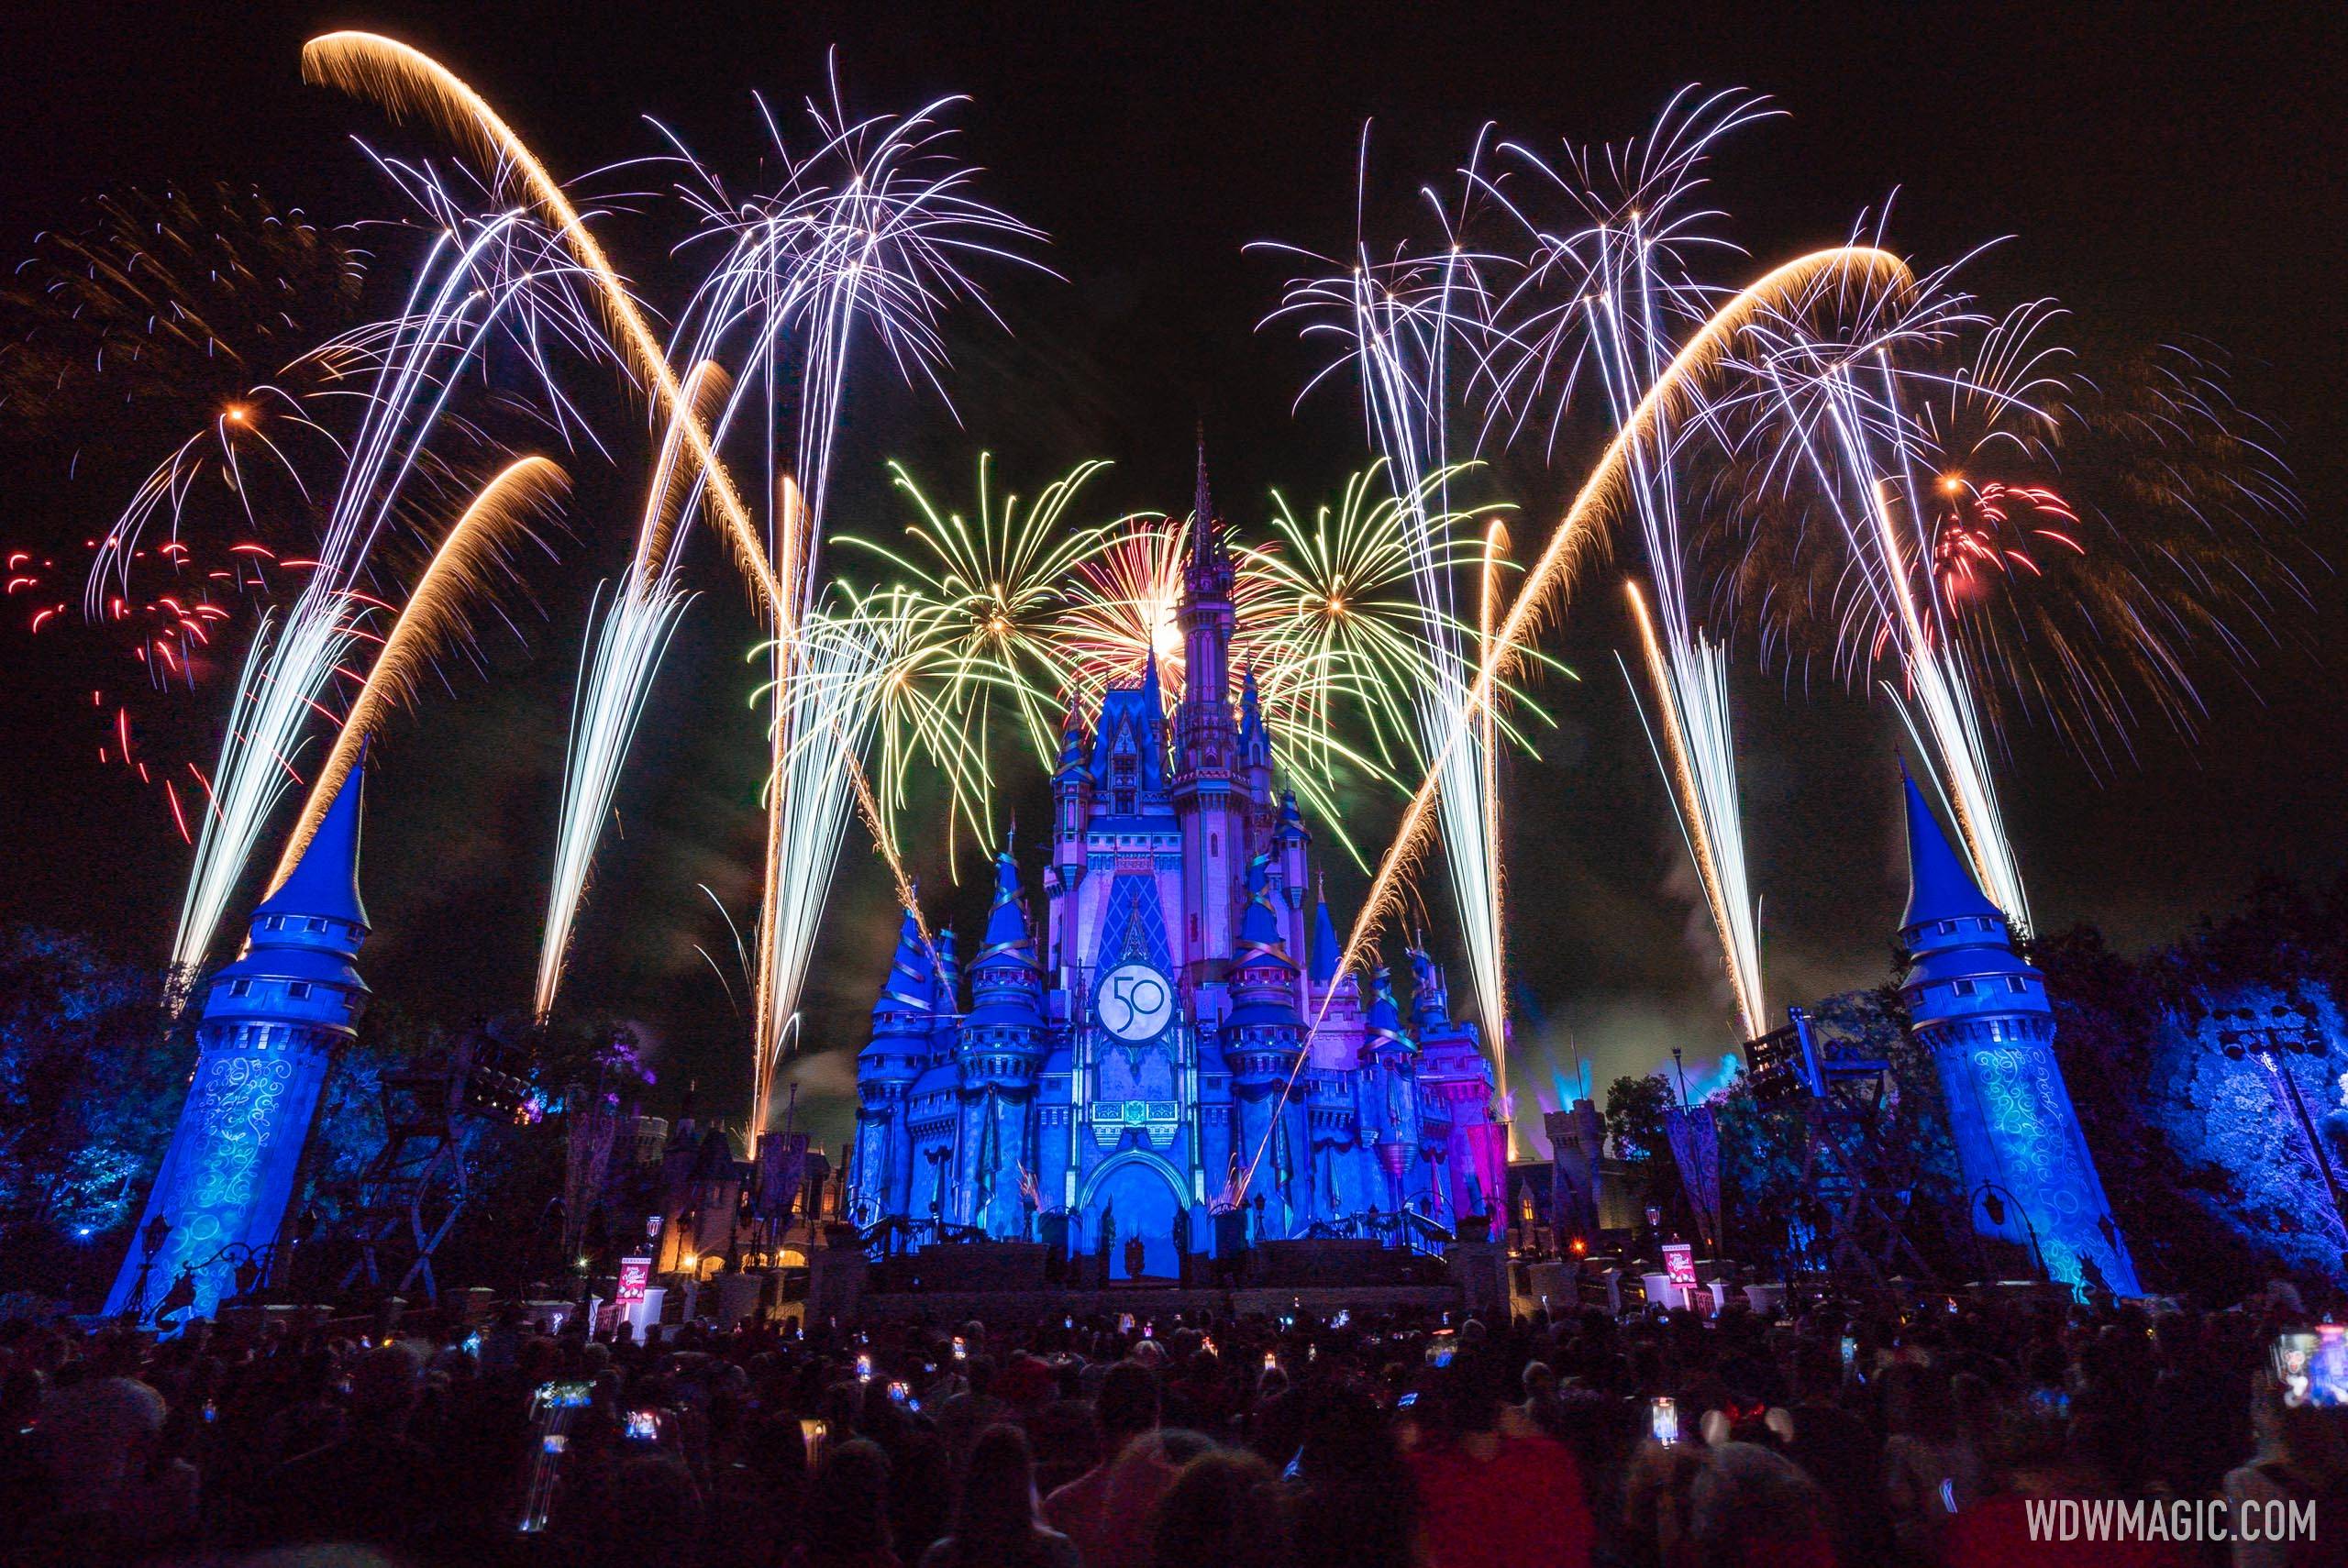 VIDEO - Minnie's Wonderful Christmastime Fireworks from Mickey's Very Merry Christmas Party